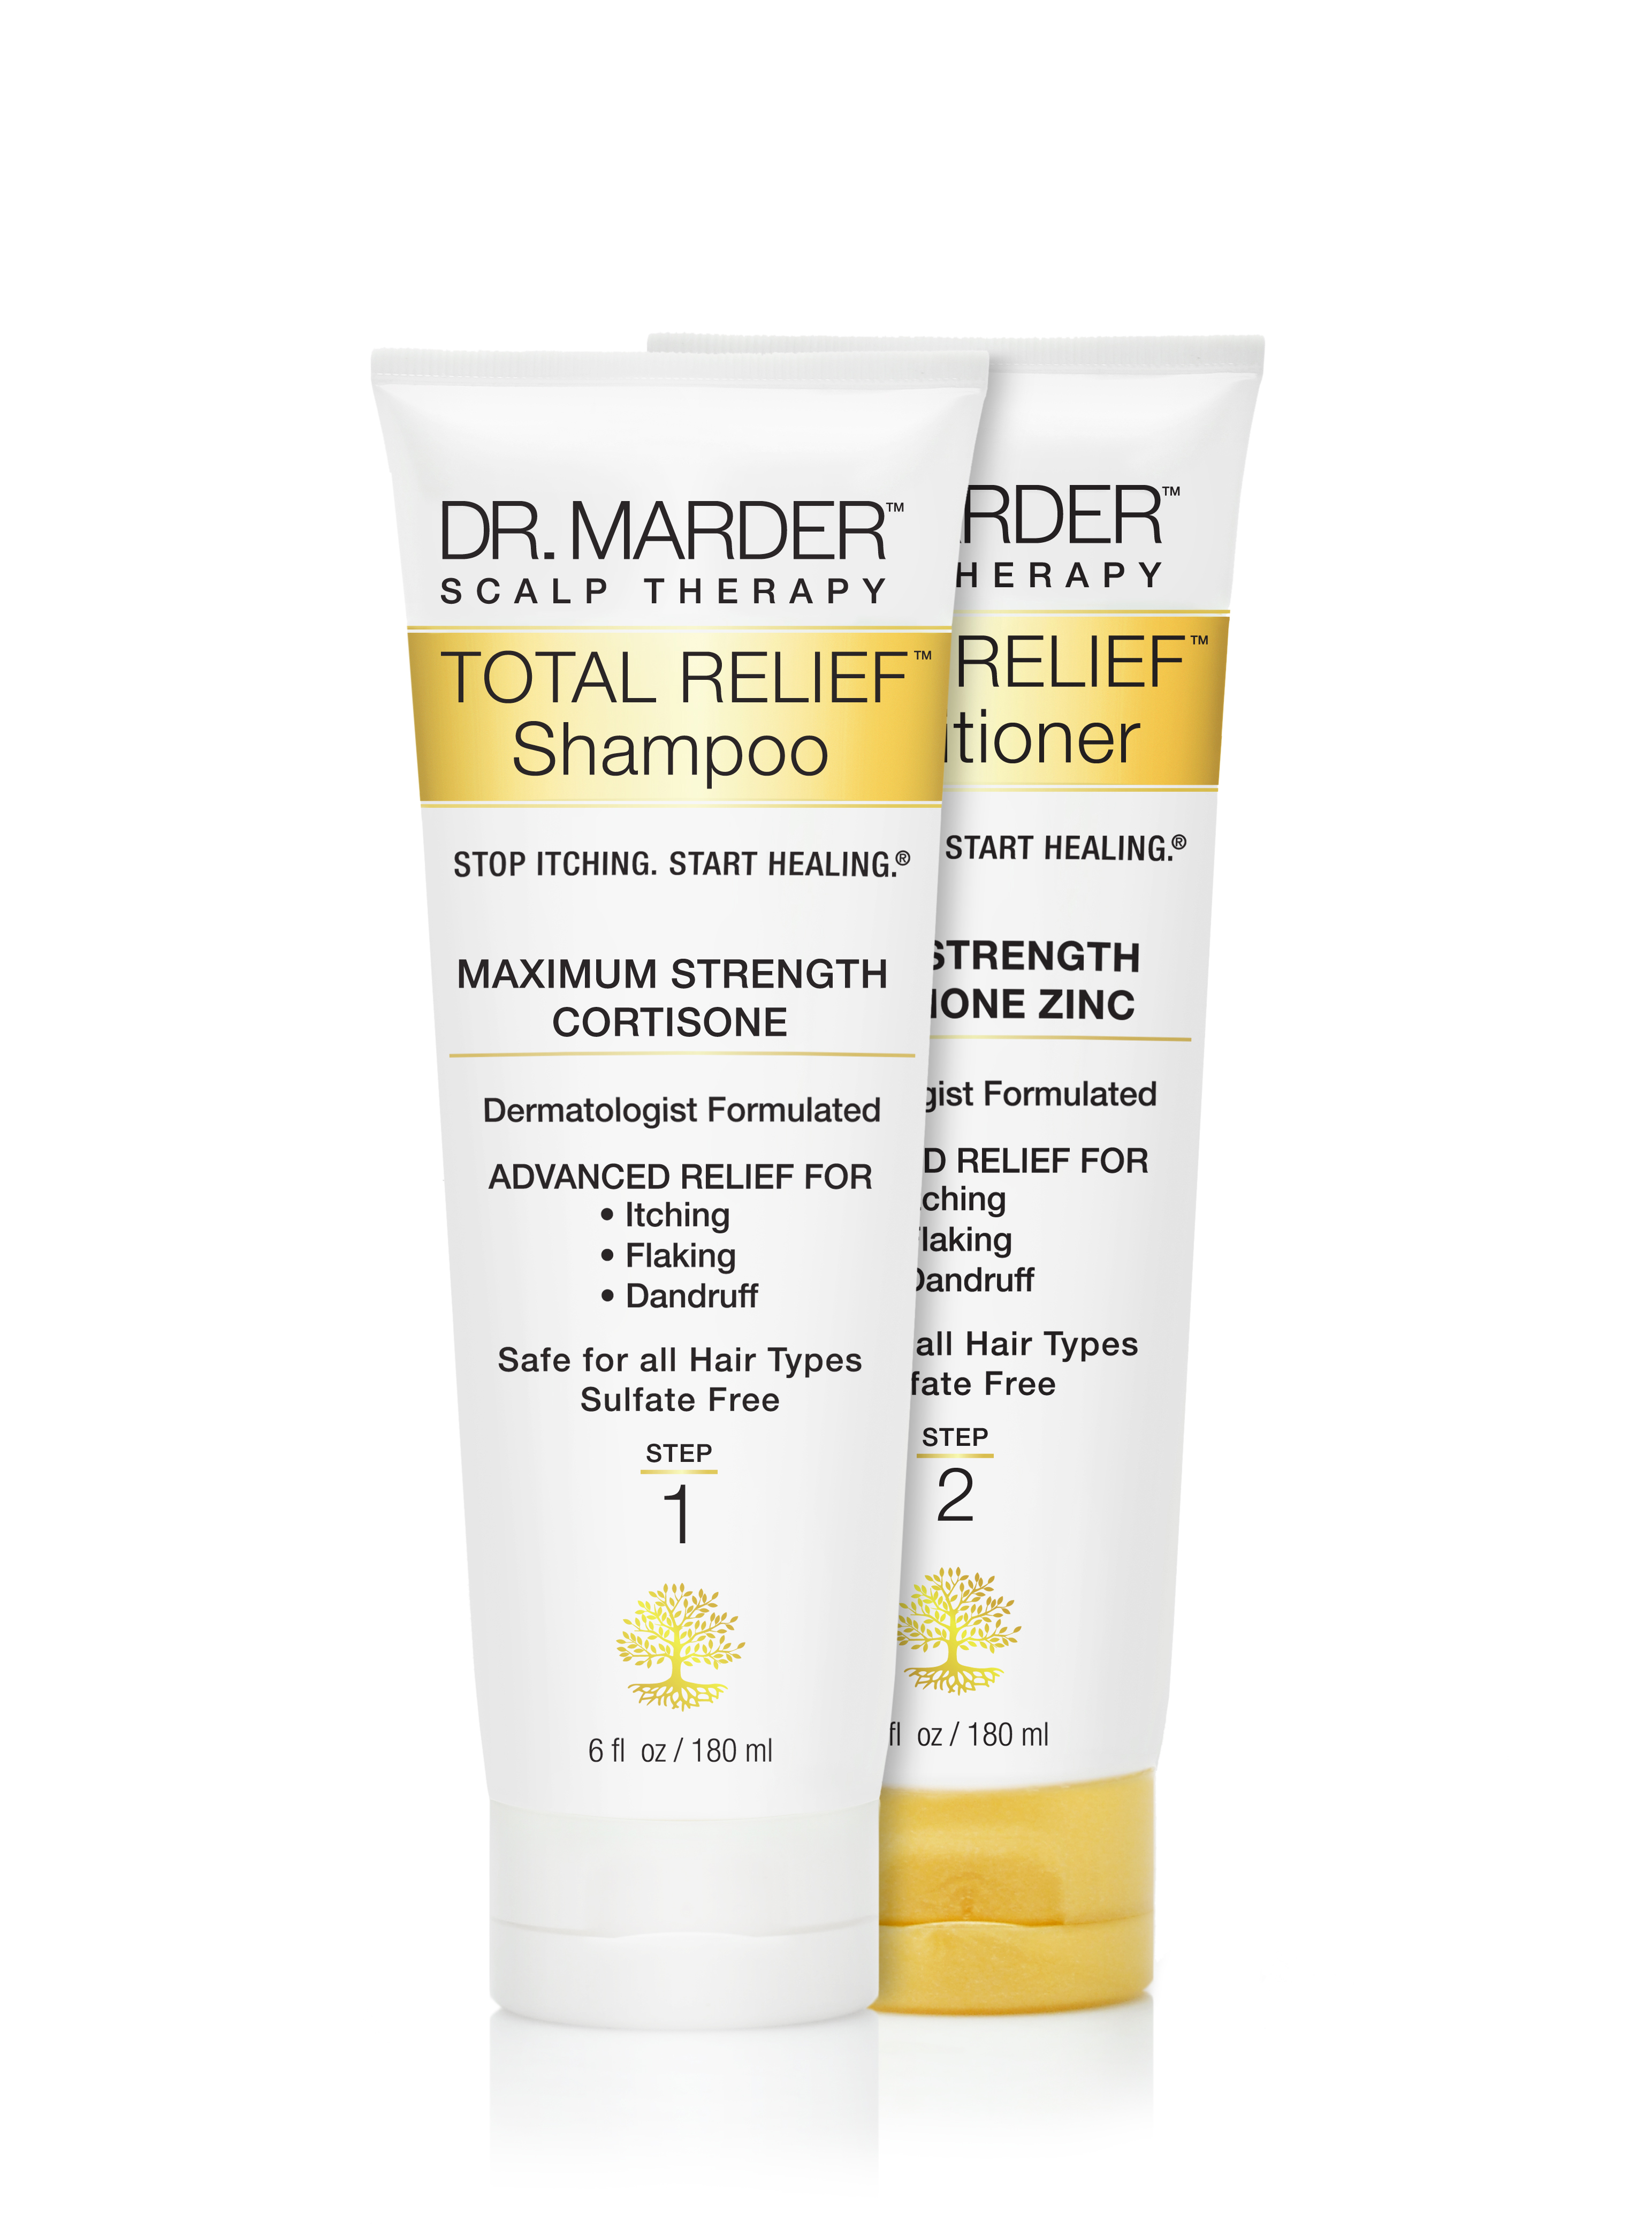 Hair Havoc No More with Dr. Marder Scalp Therapy